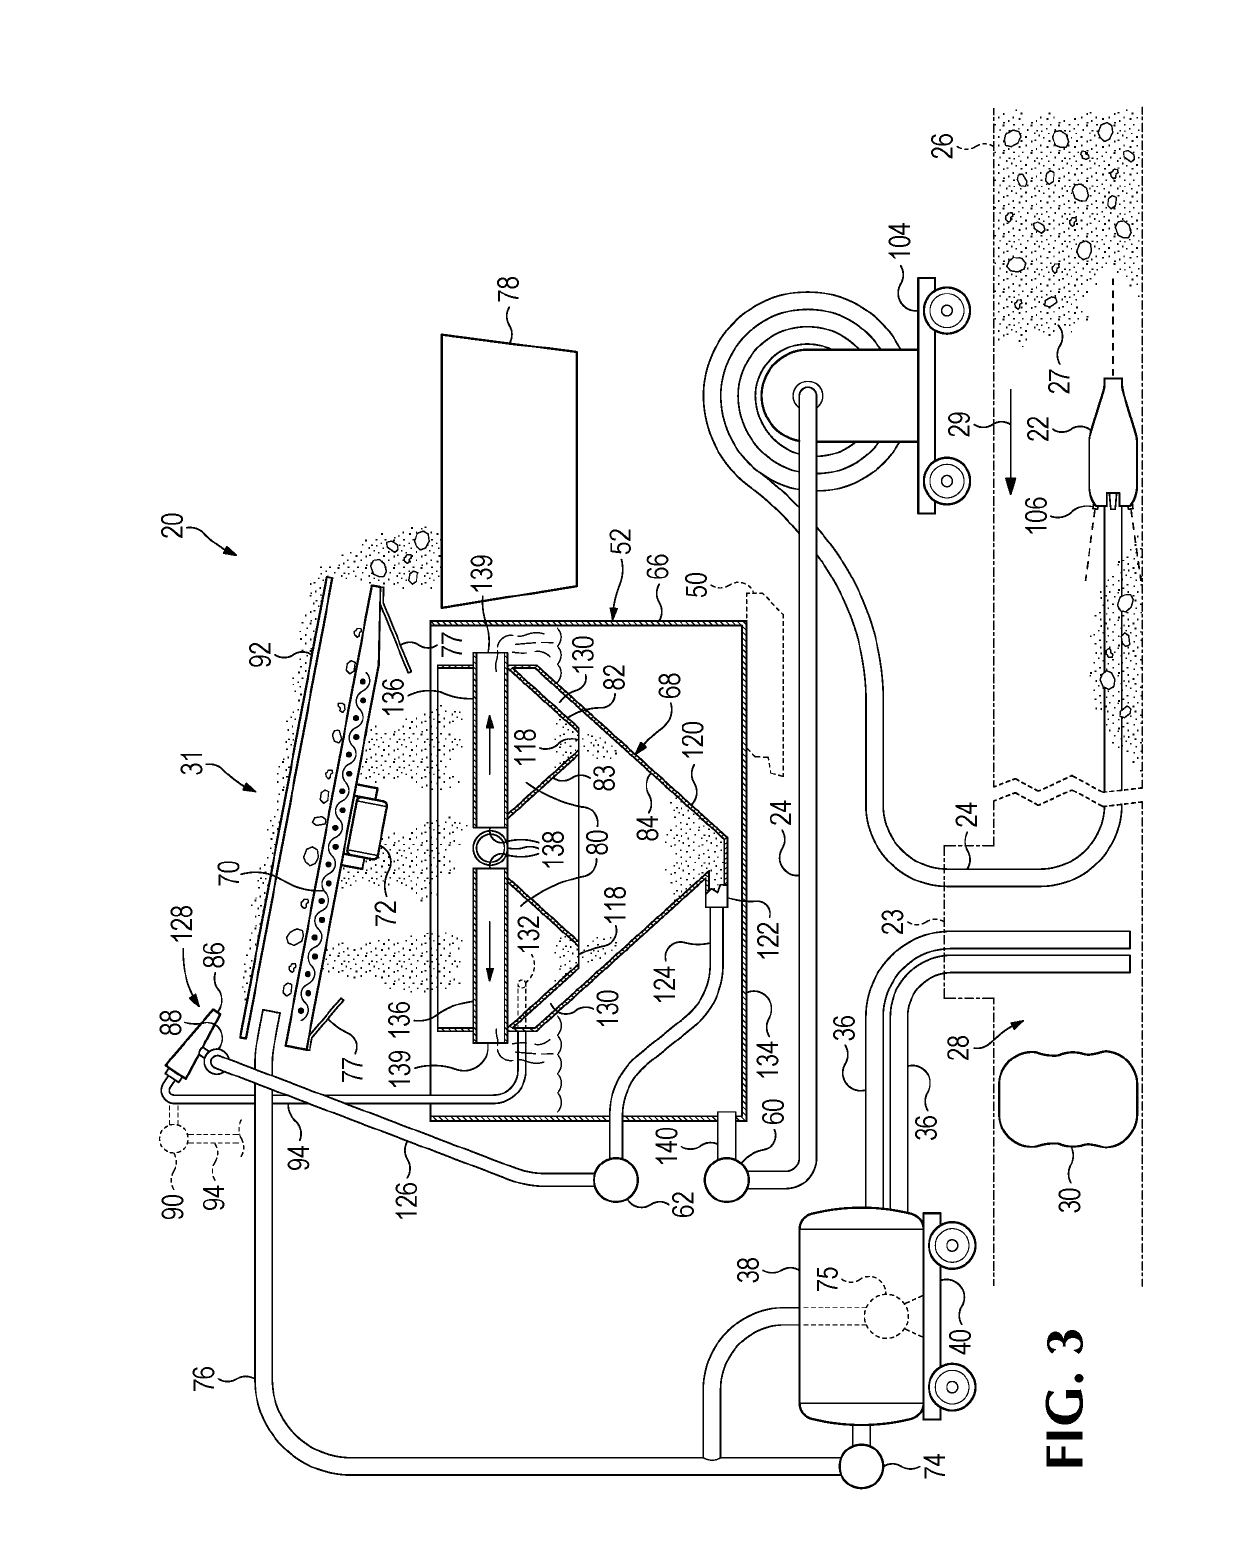 Method and apparatus for cleaning large pipes, such as storm drain conduits